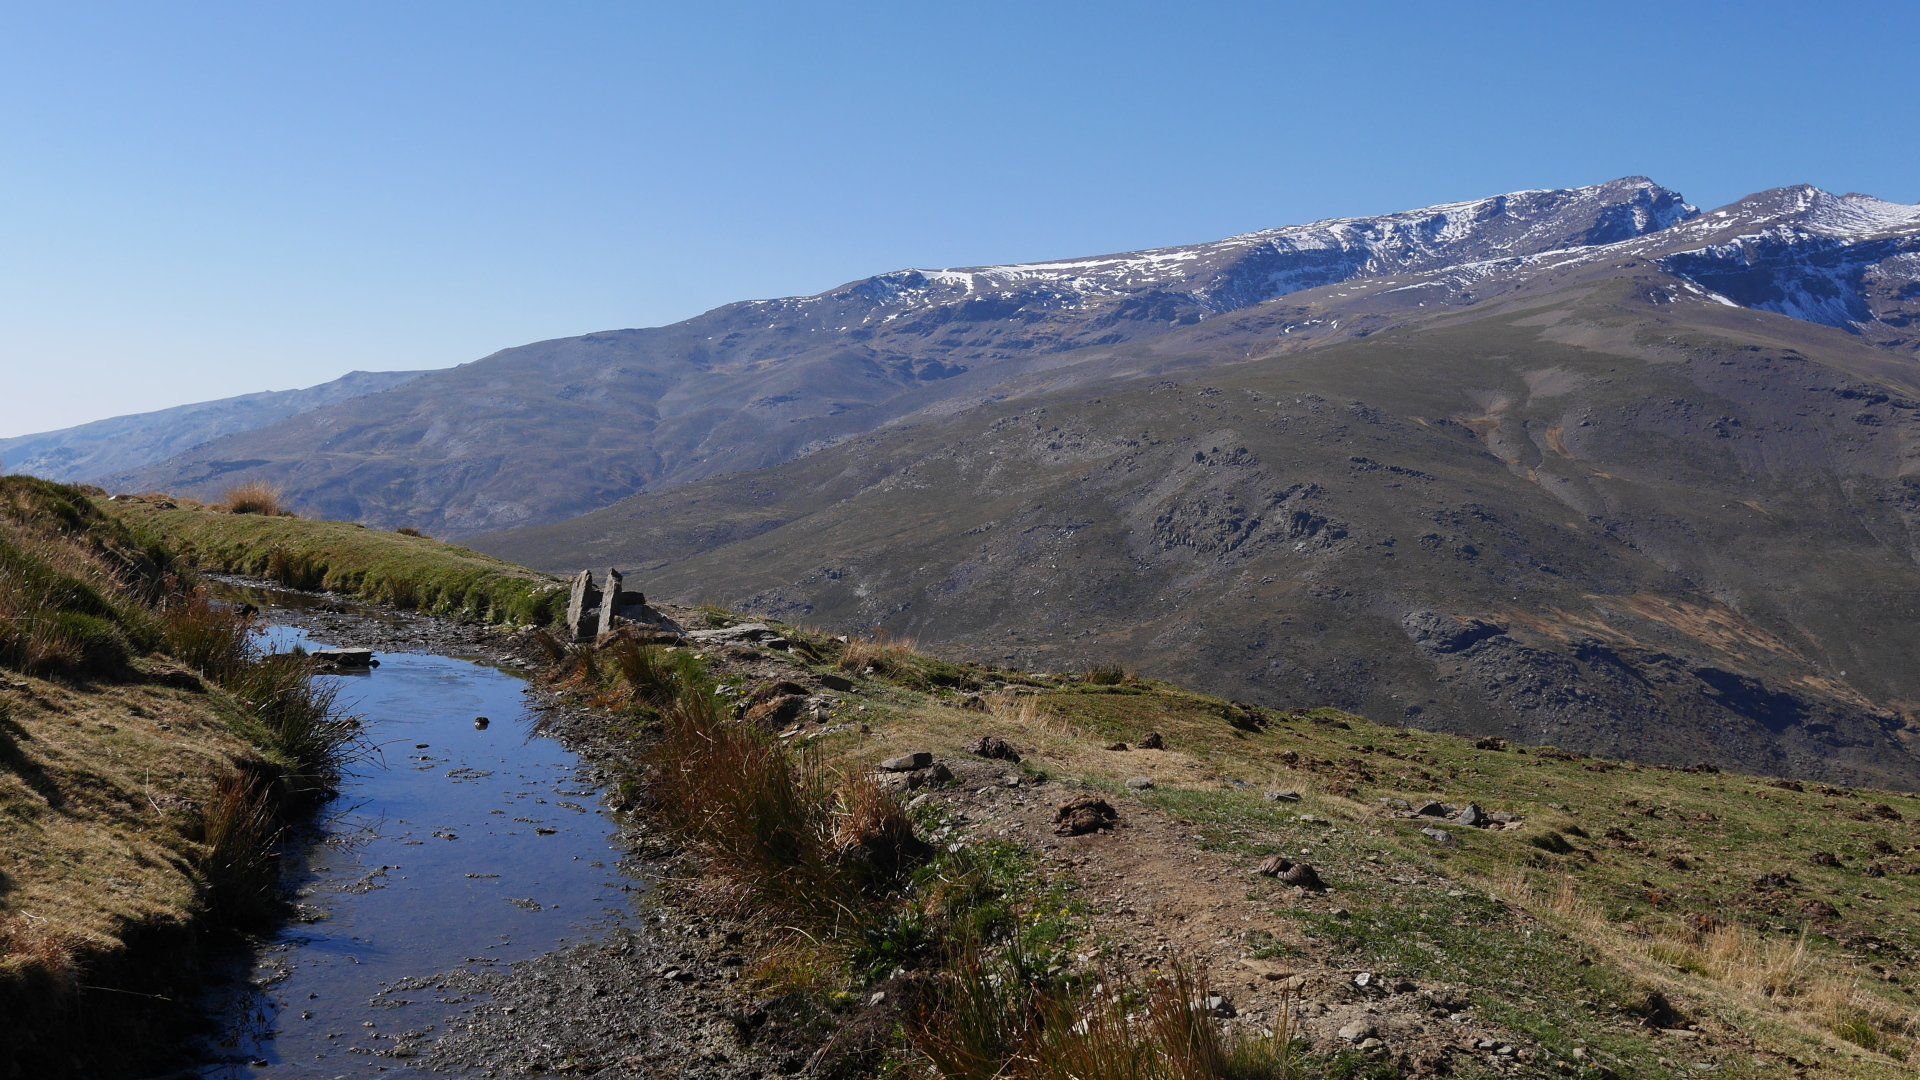 Acequia de Berchules Walk with the view of Mulhacen